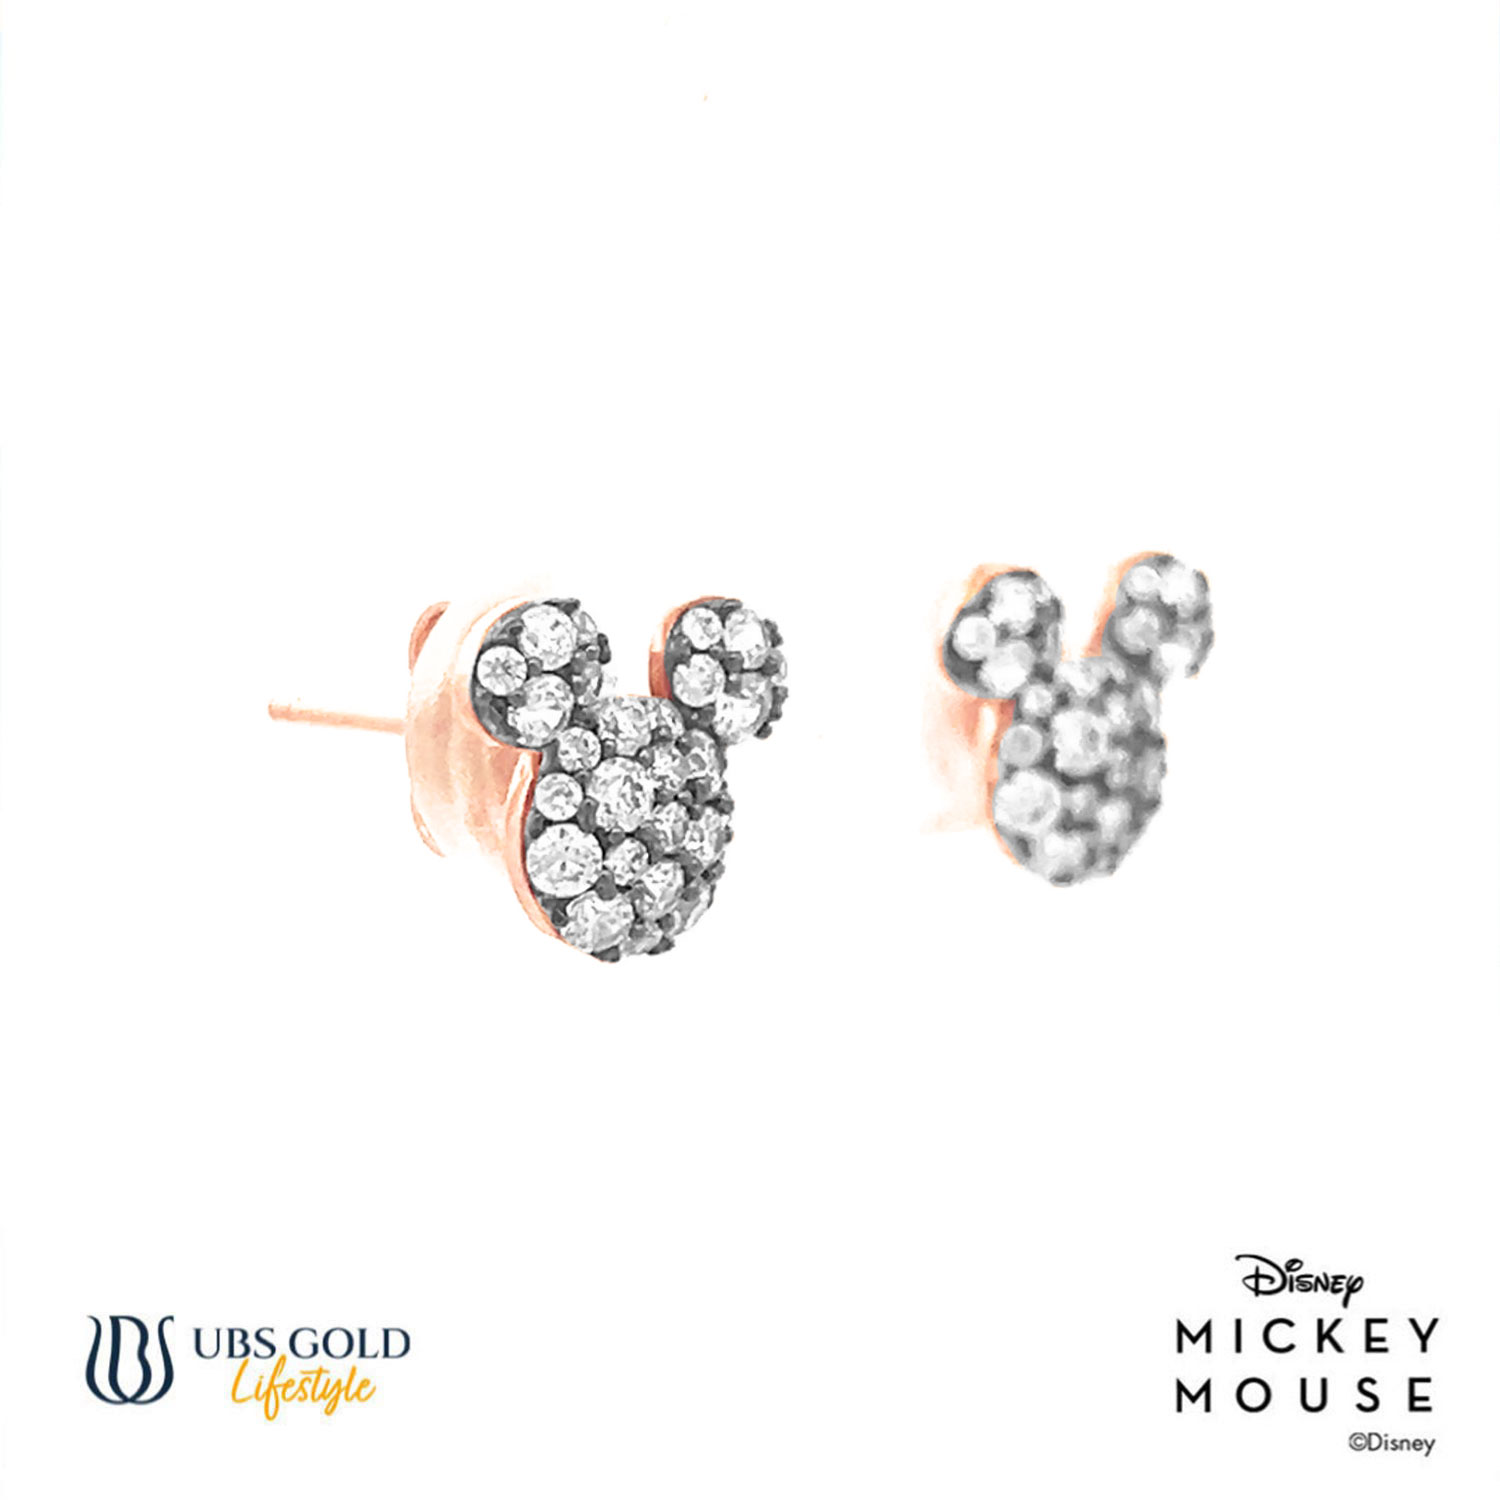 UBS Gold Anting Emas Disney Mickey Mouse - Cwy0054 - 17K